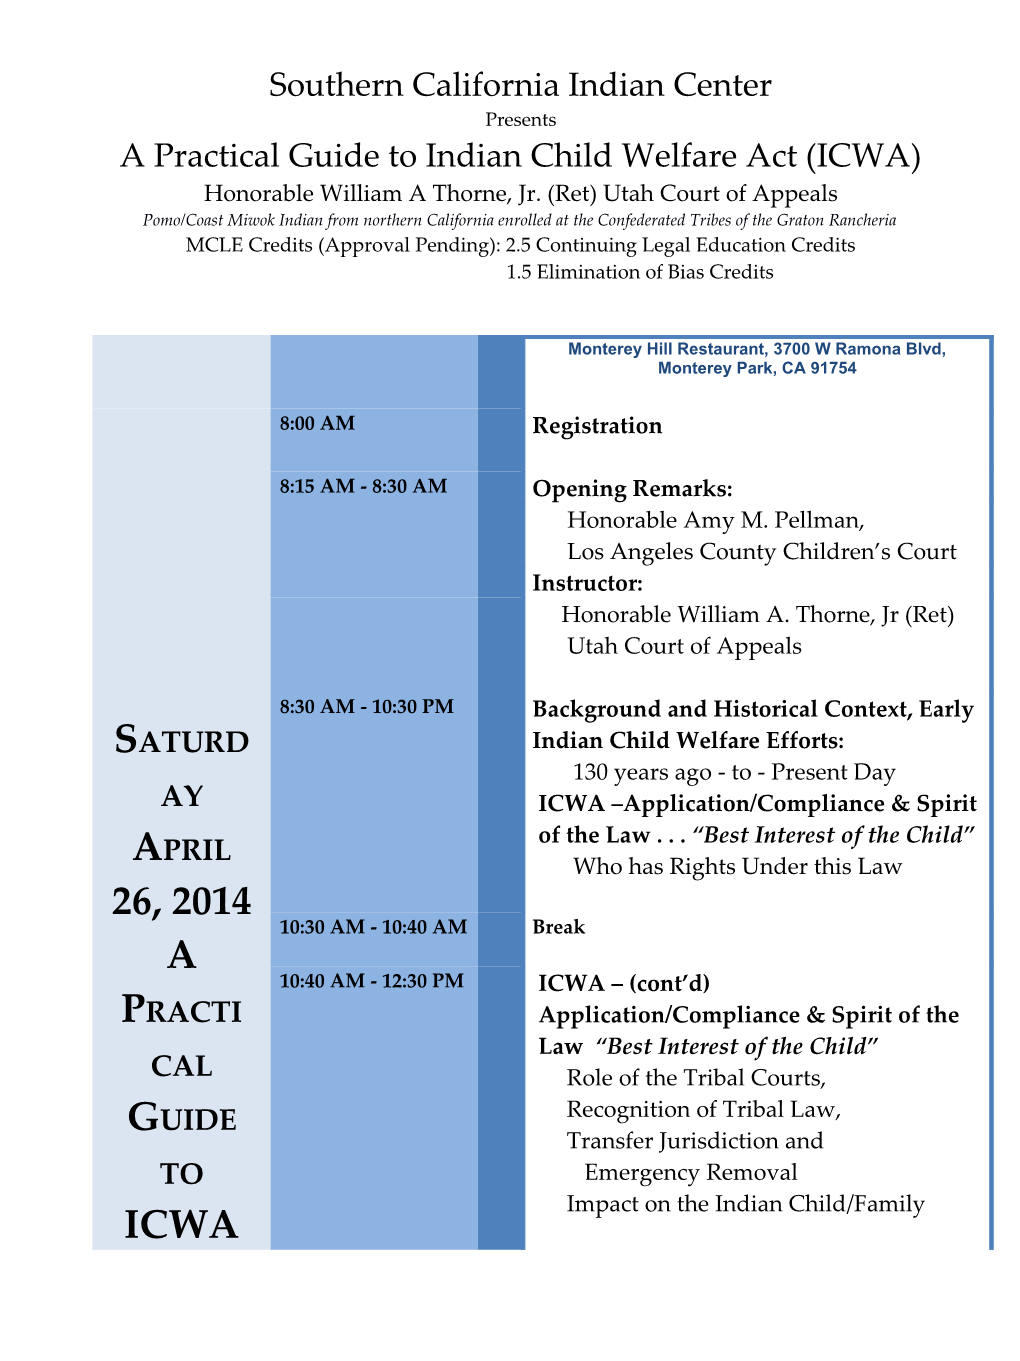 A Practical Guide to Indian Child Welfare Act (ICWA)